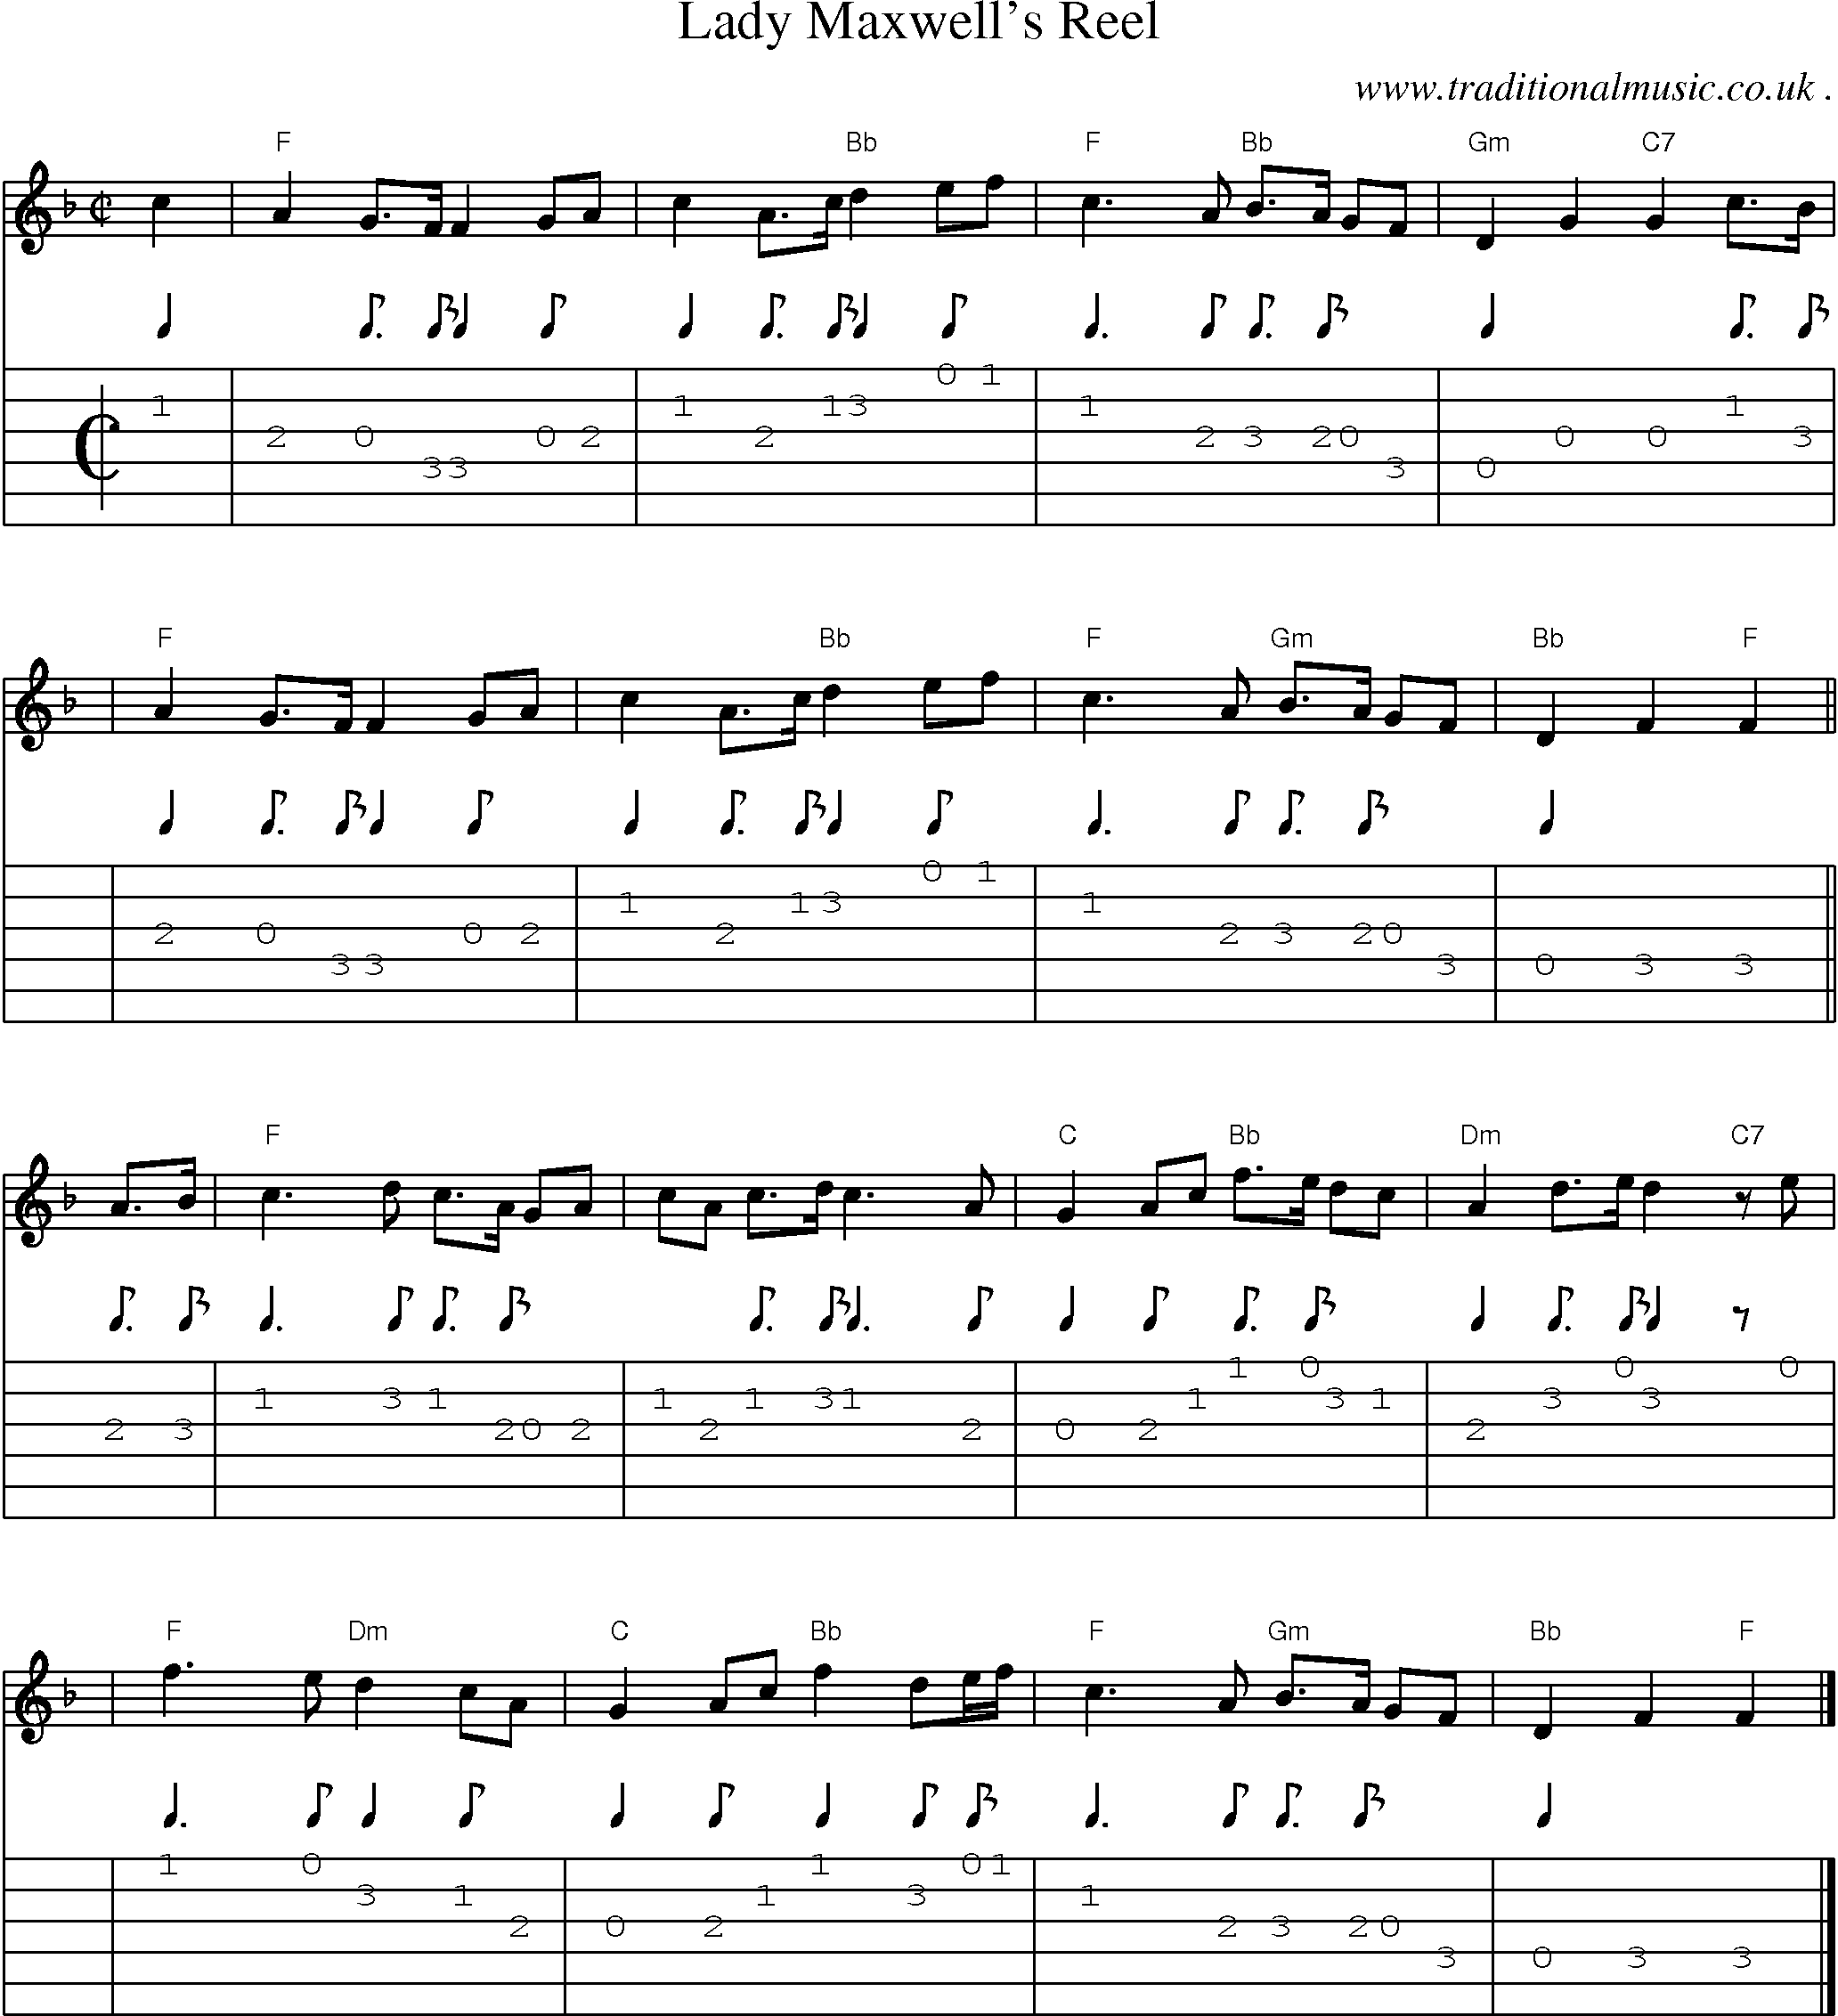 Sheet-music  score, Chords and Guitar Tabs for Lady Maxwells Reel